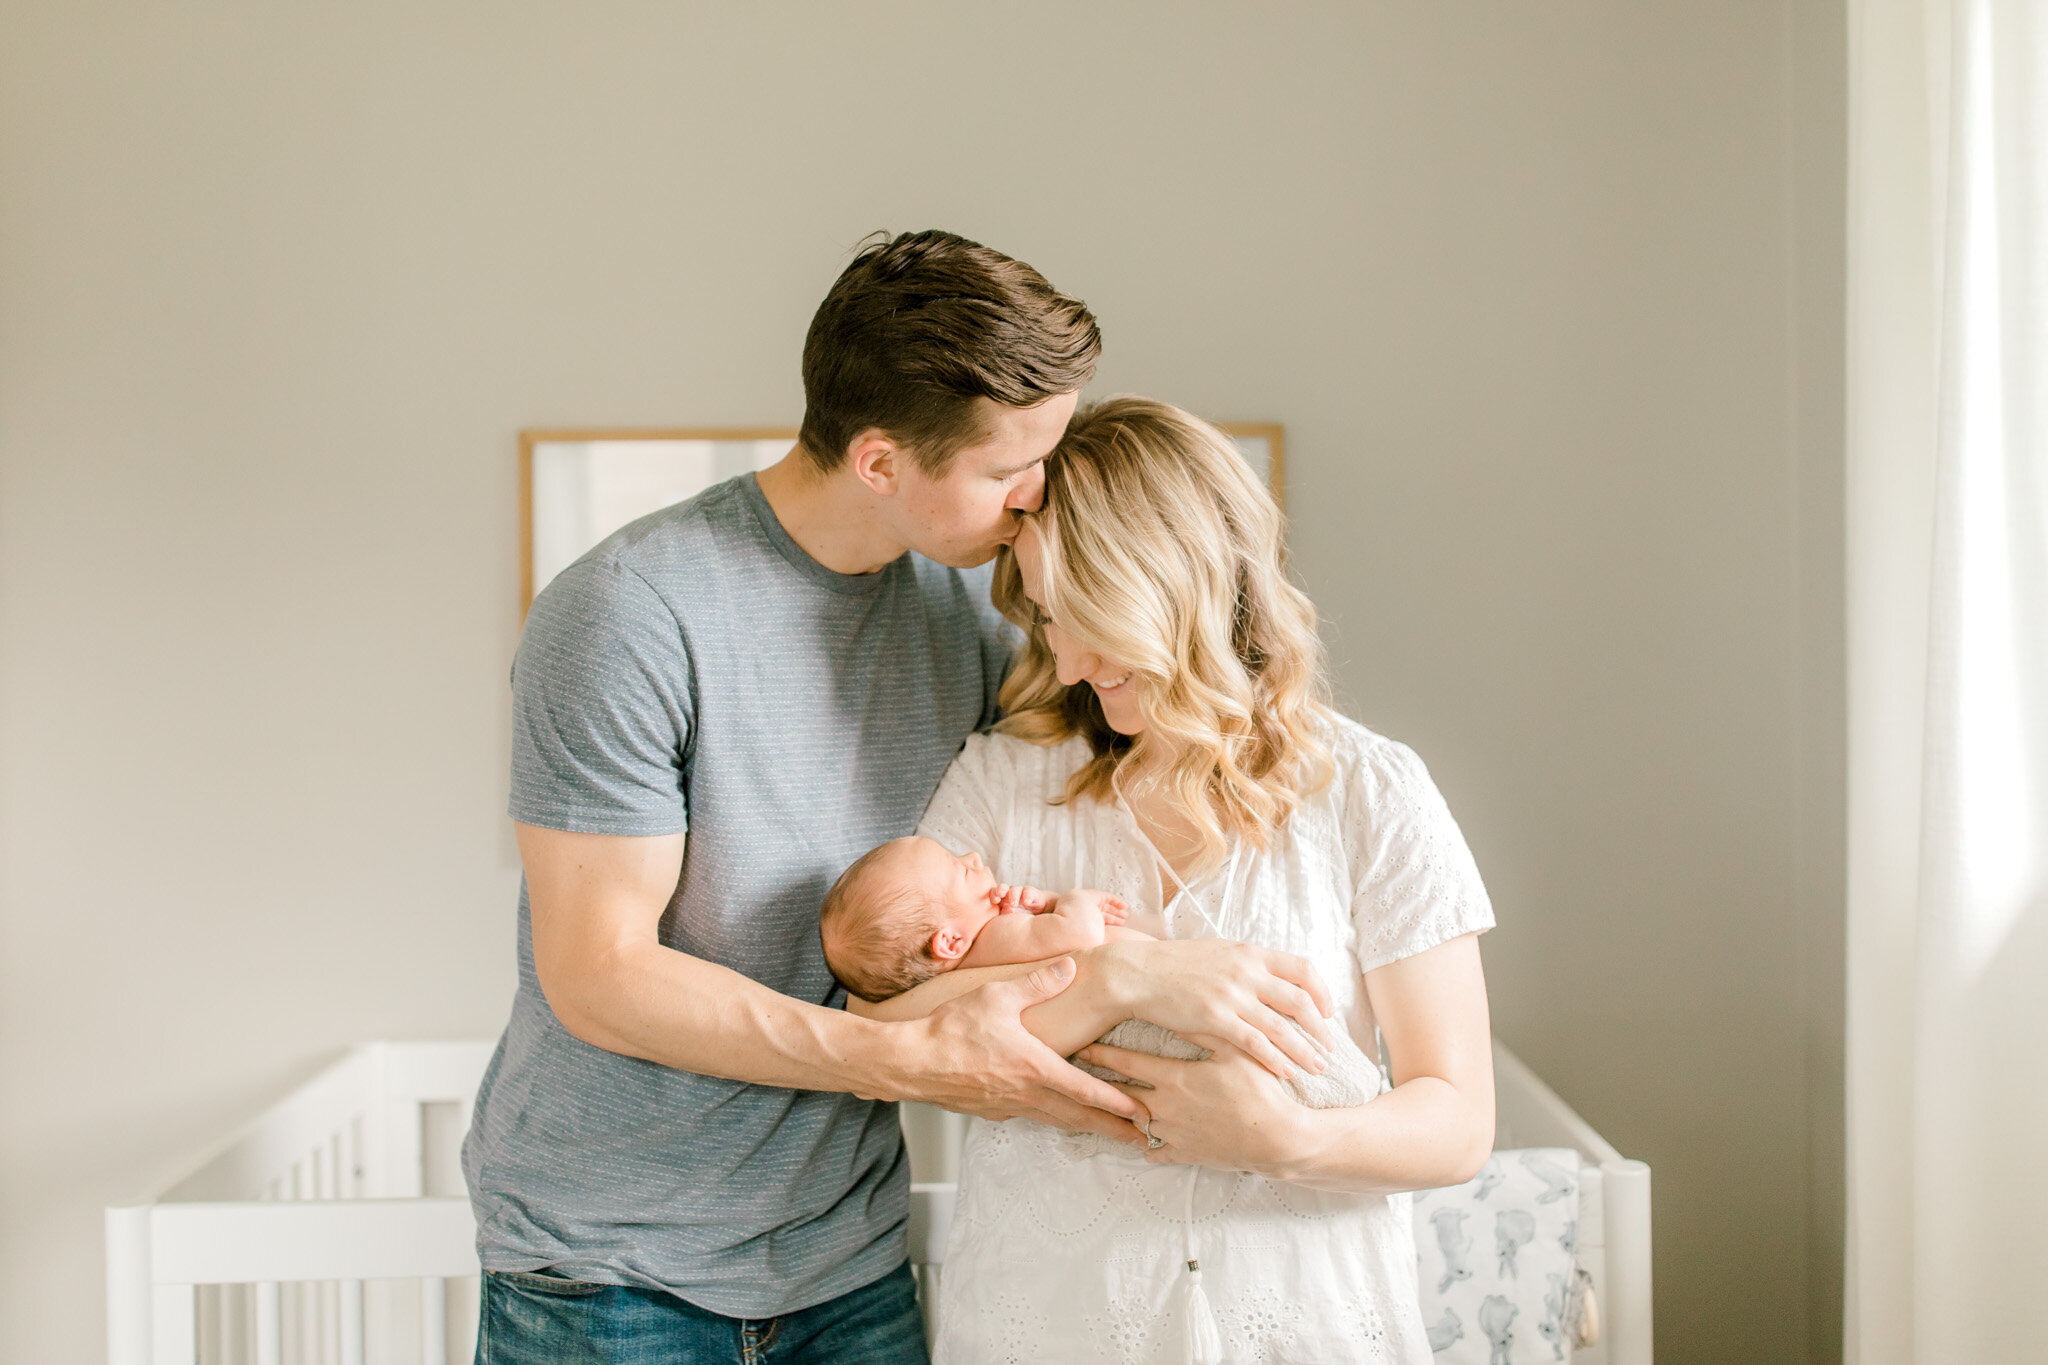 Light and Airy In-Home Newborn Session | Grand Rapids Newborn Photography | Lifestyle Newborn Session